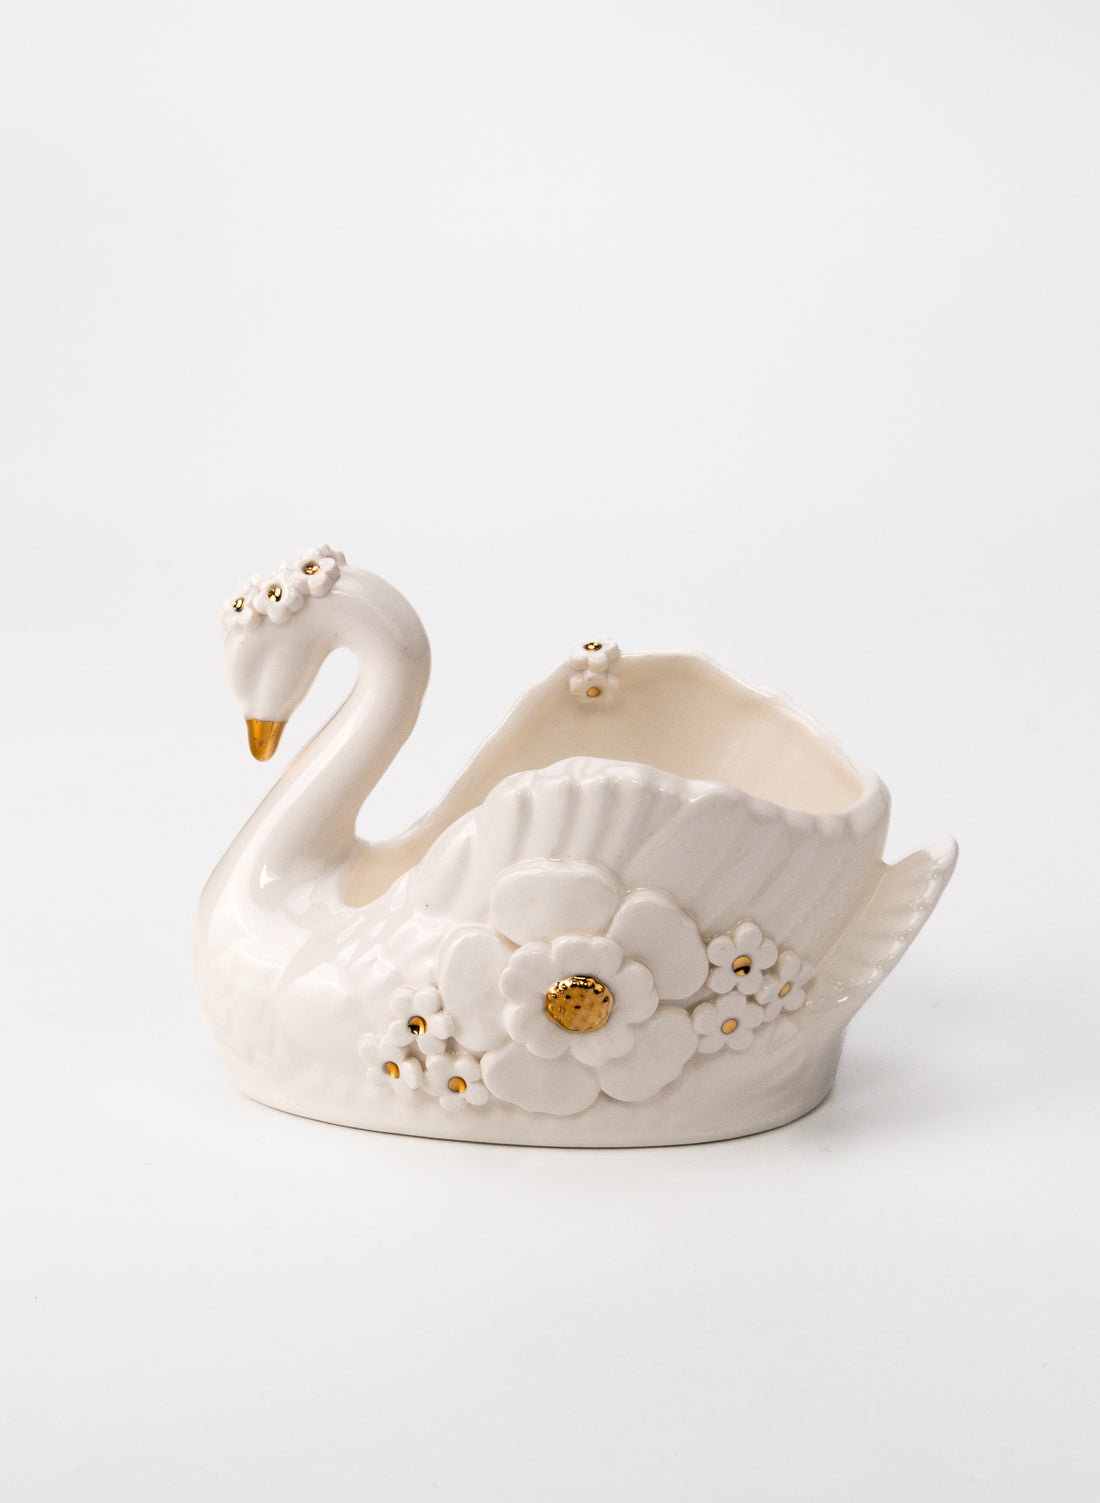 Small White Swan with Gold and White Flowers